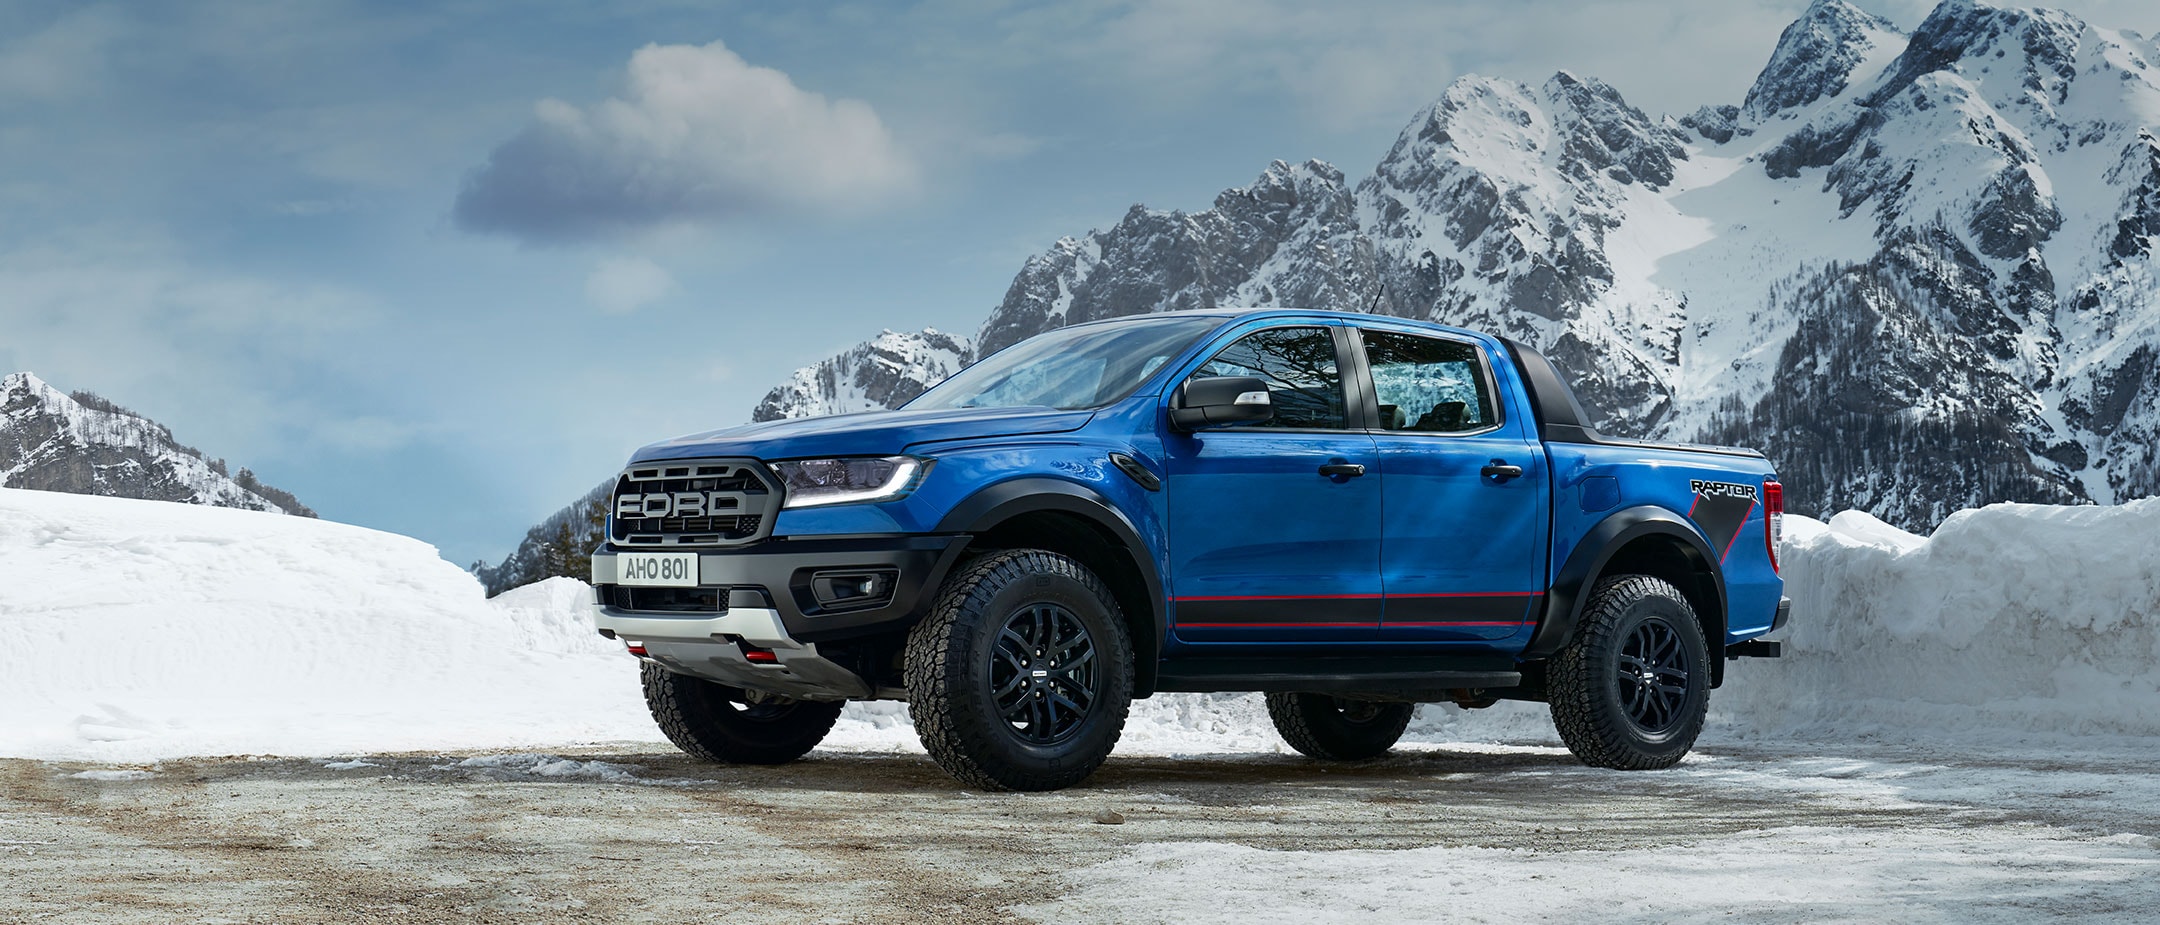 Blue Ford Ranger Raptor parked on snowy mountains